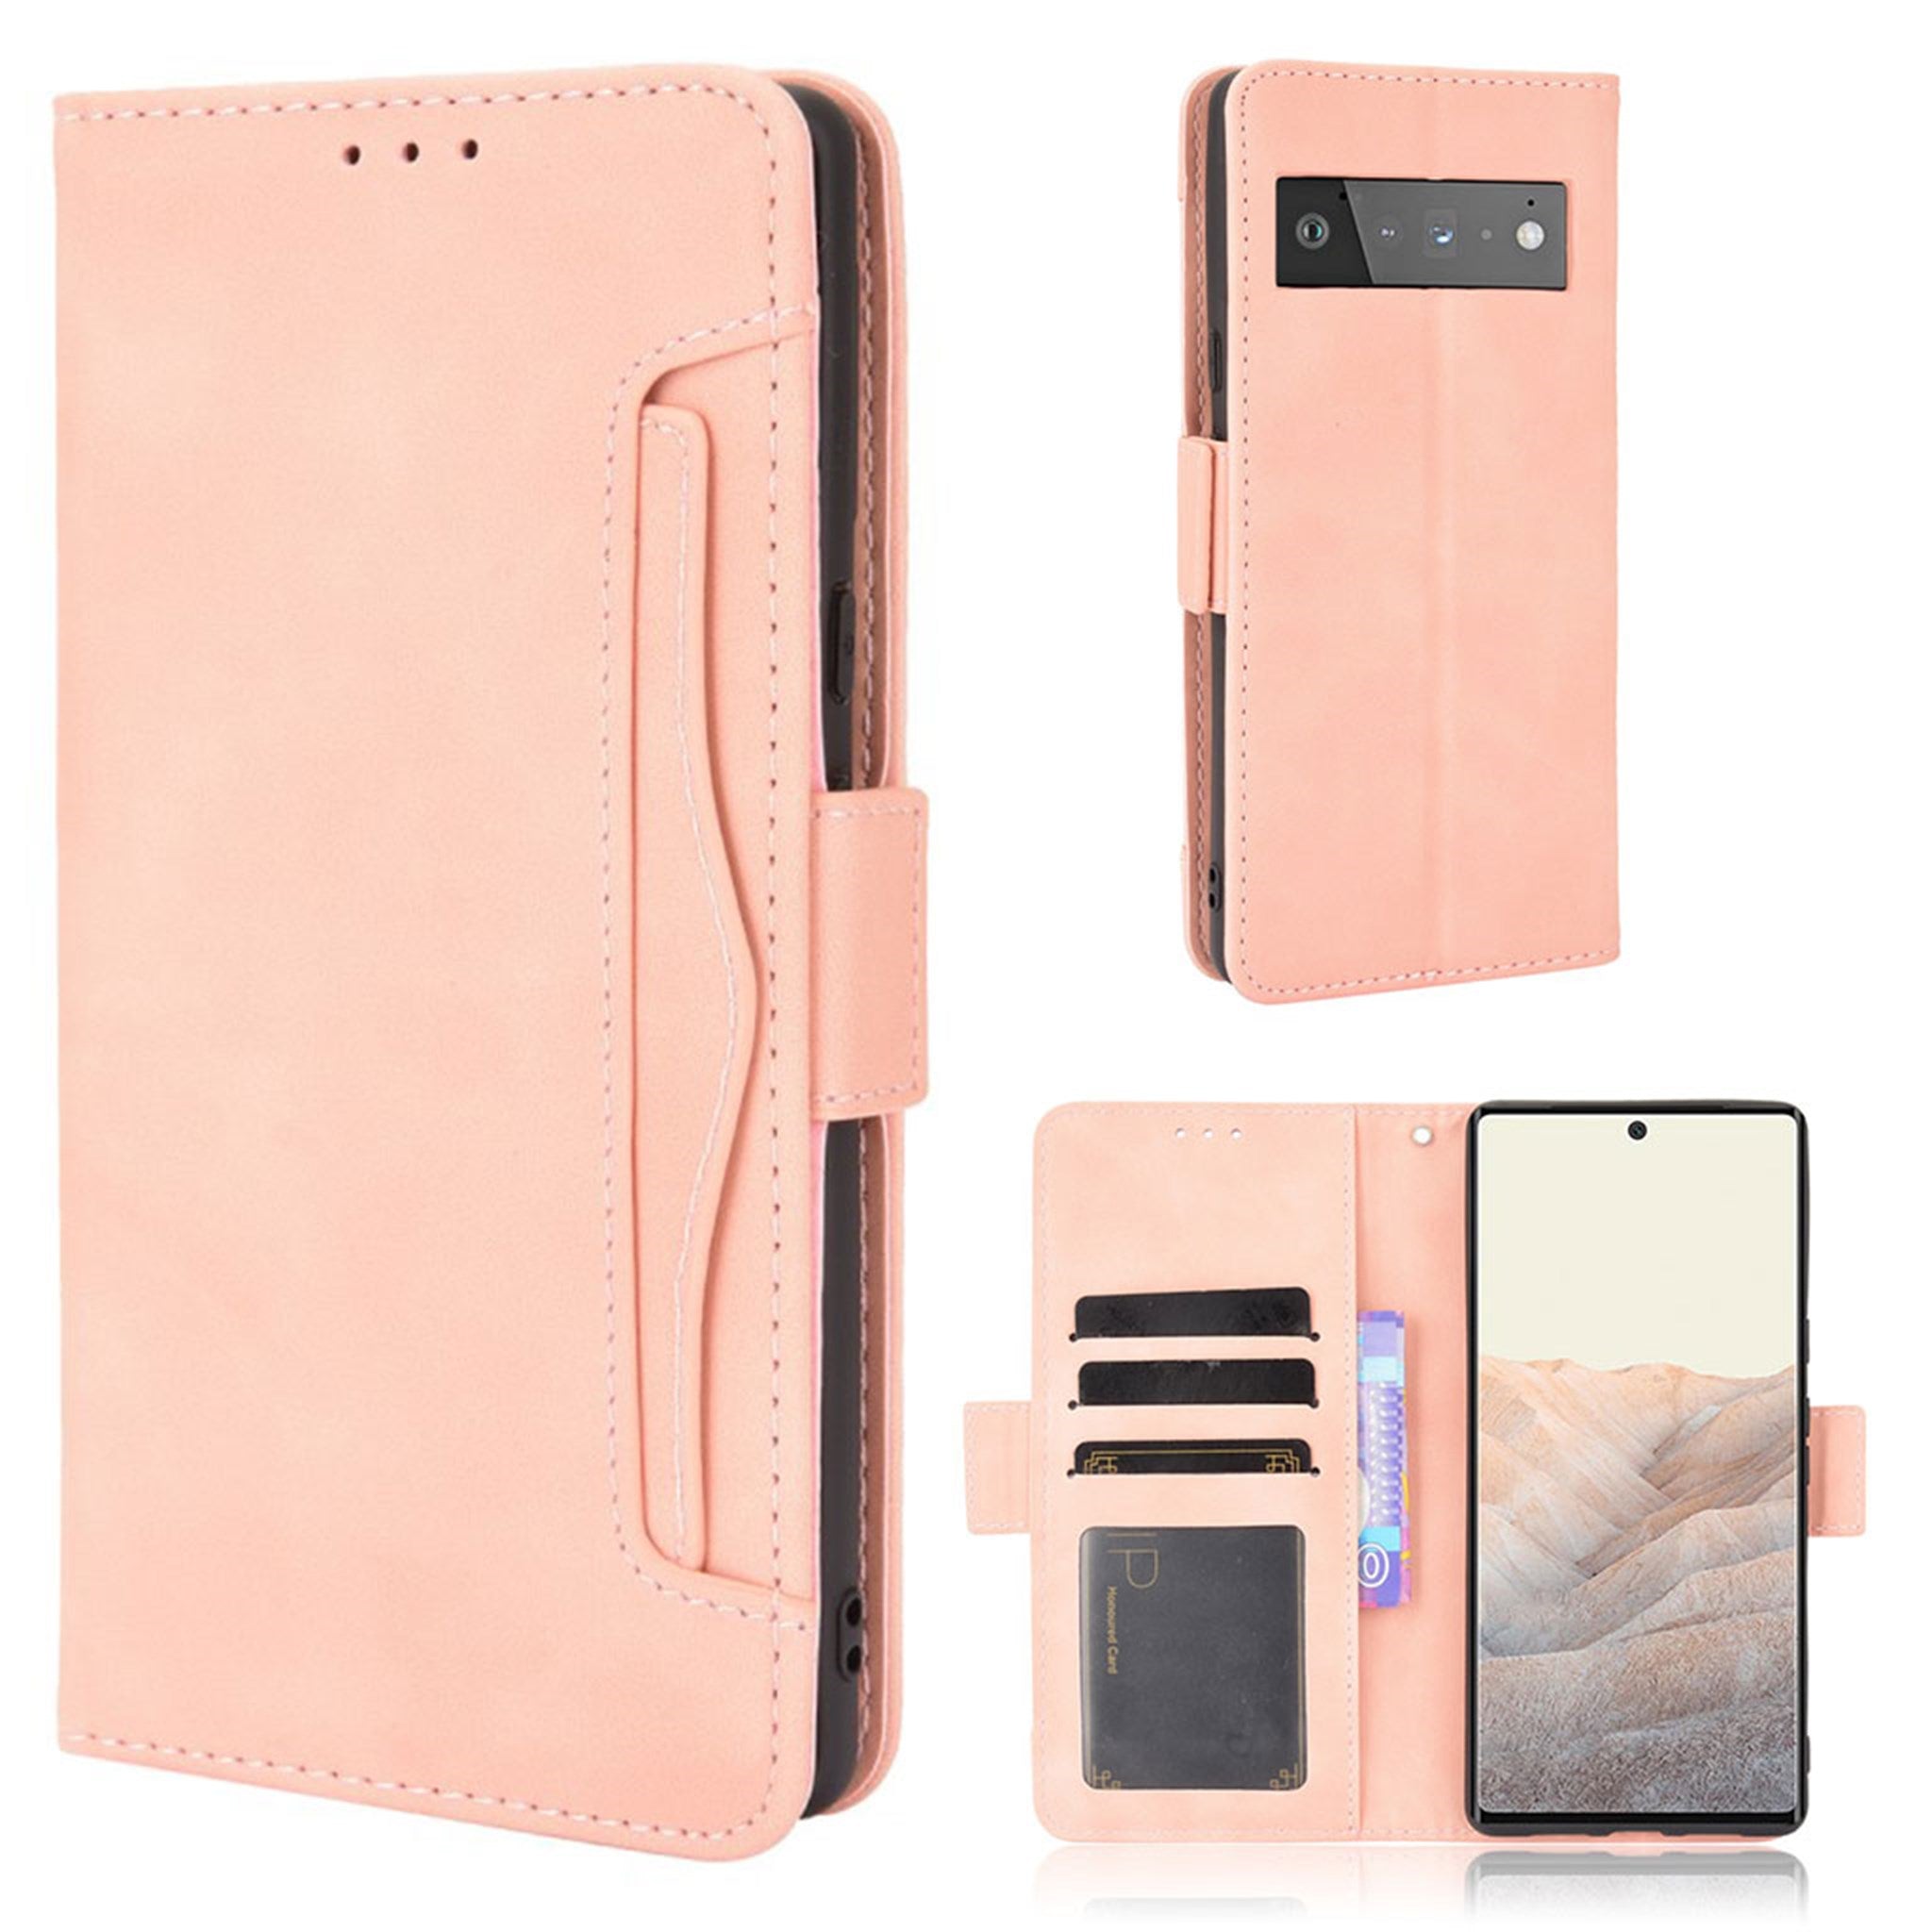 Modern-styled leather wallet case for Google Pixel 6 Pro - Pink